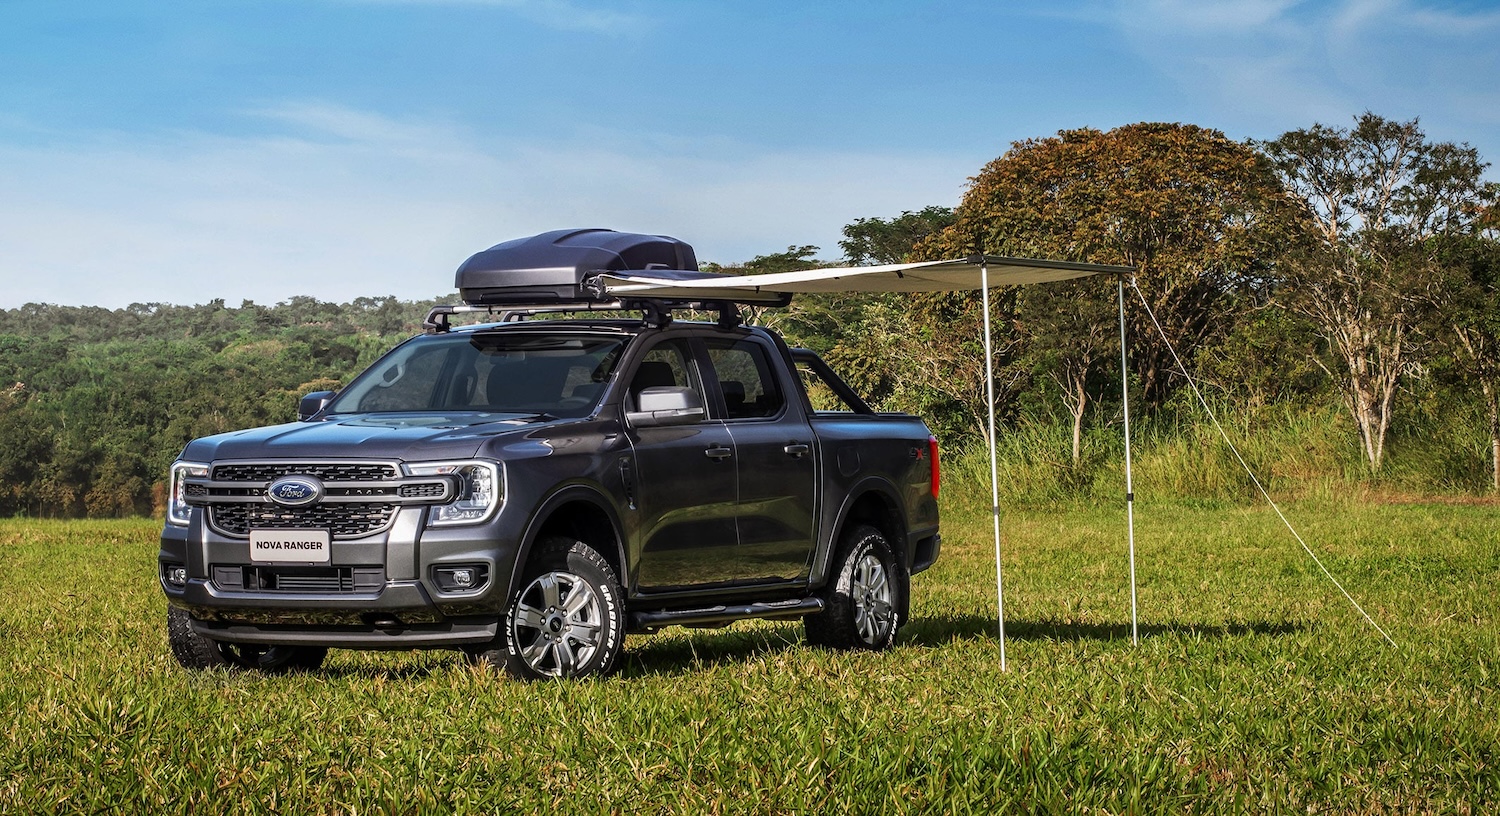 Ford Ranger Accessory Lineup For Brazil Officially Revealed